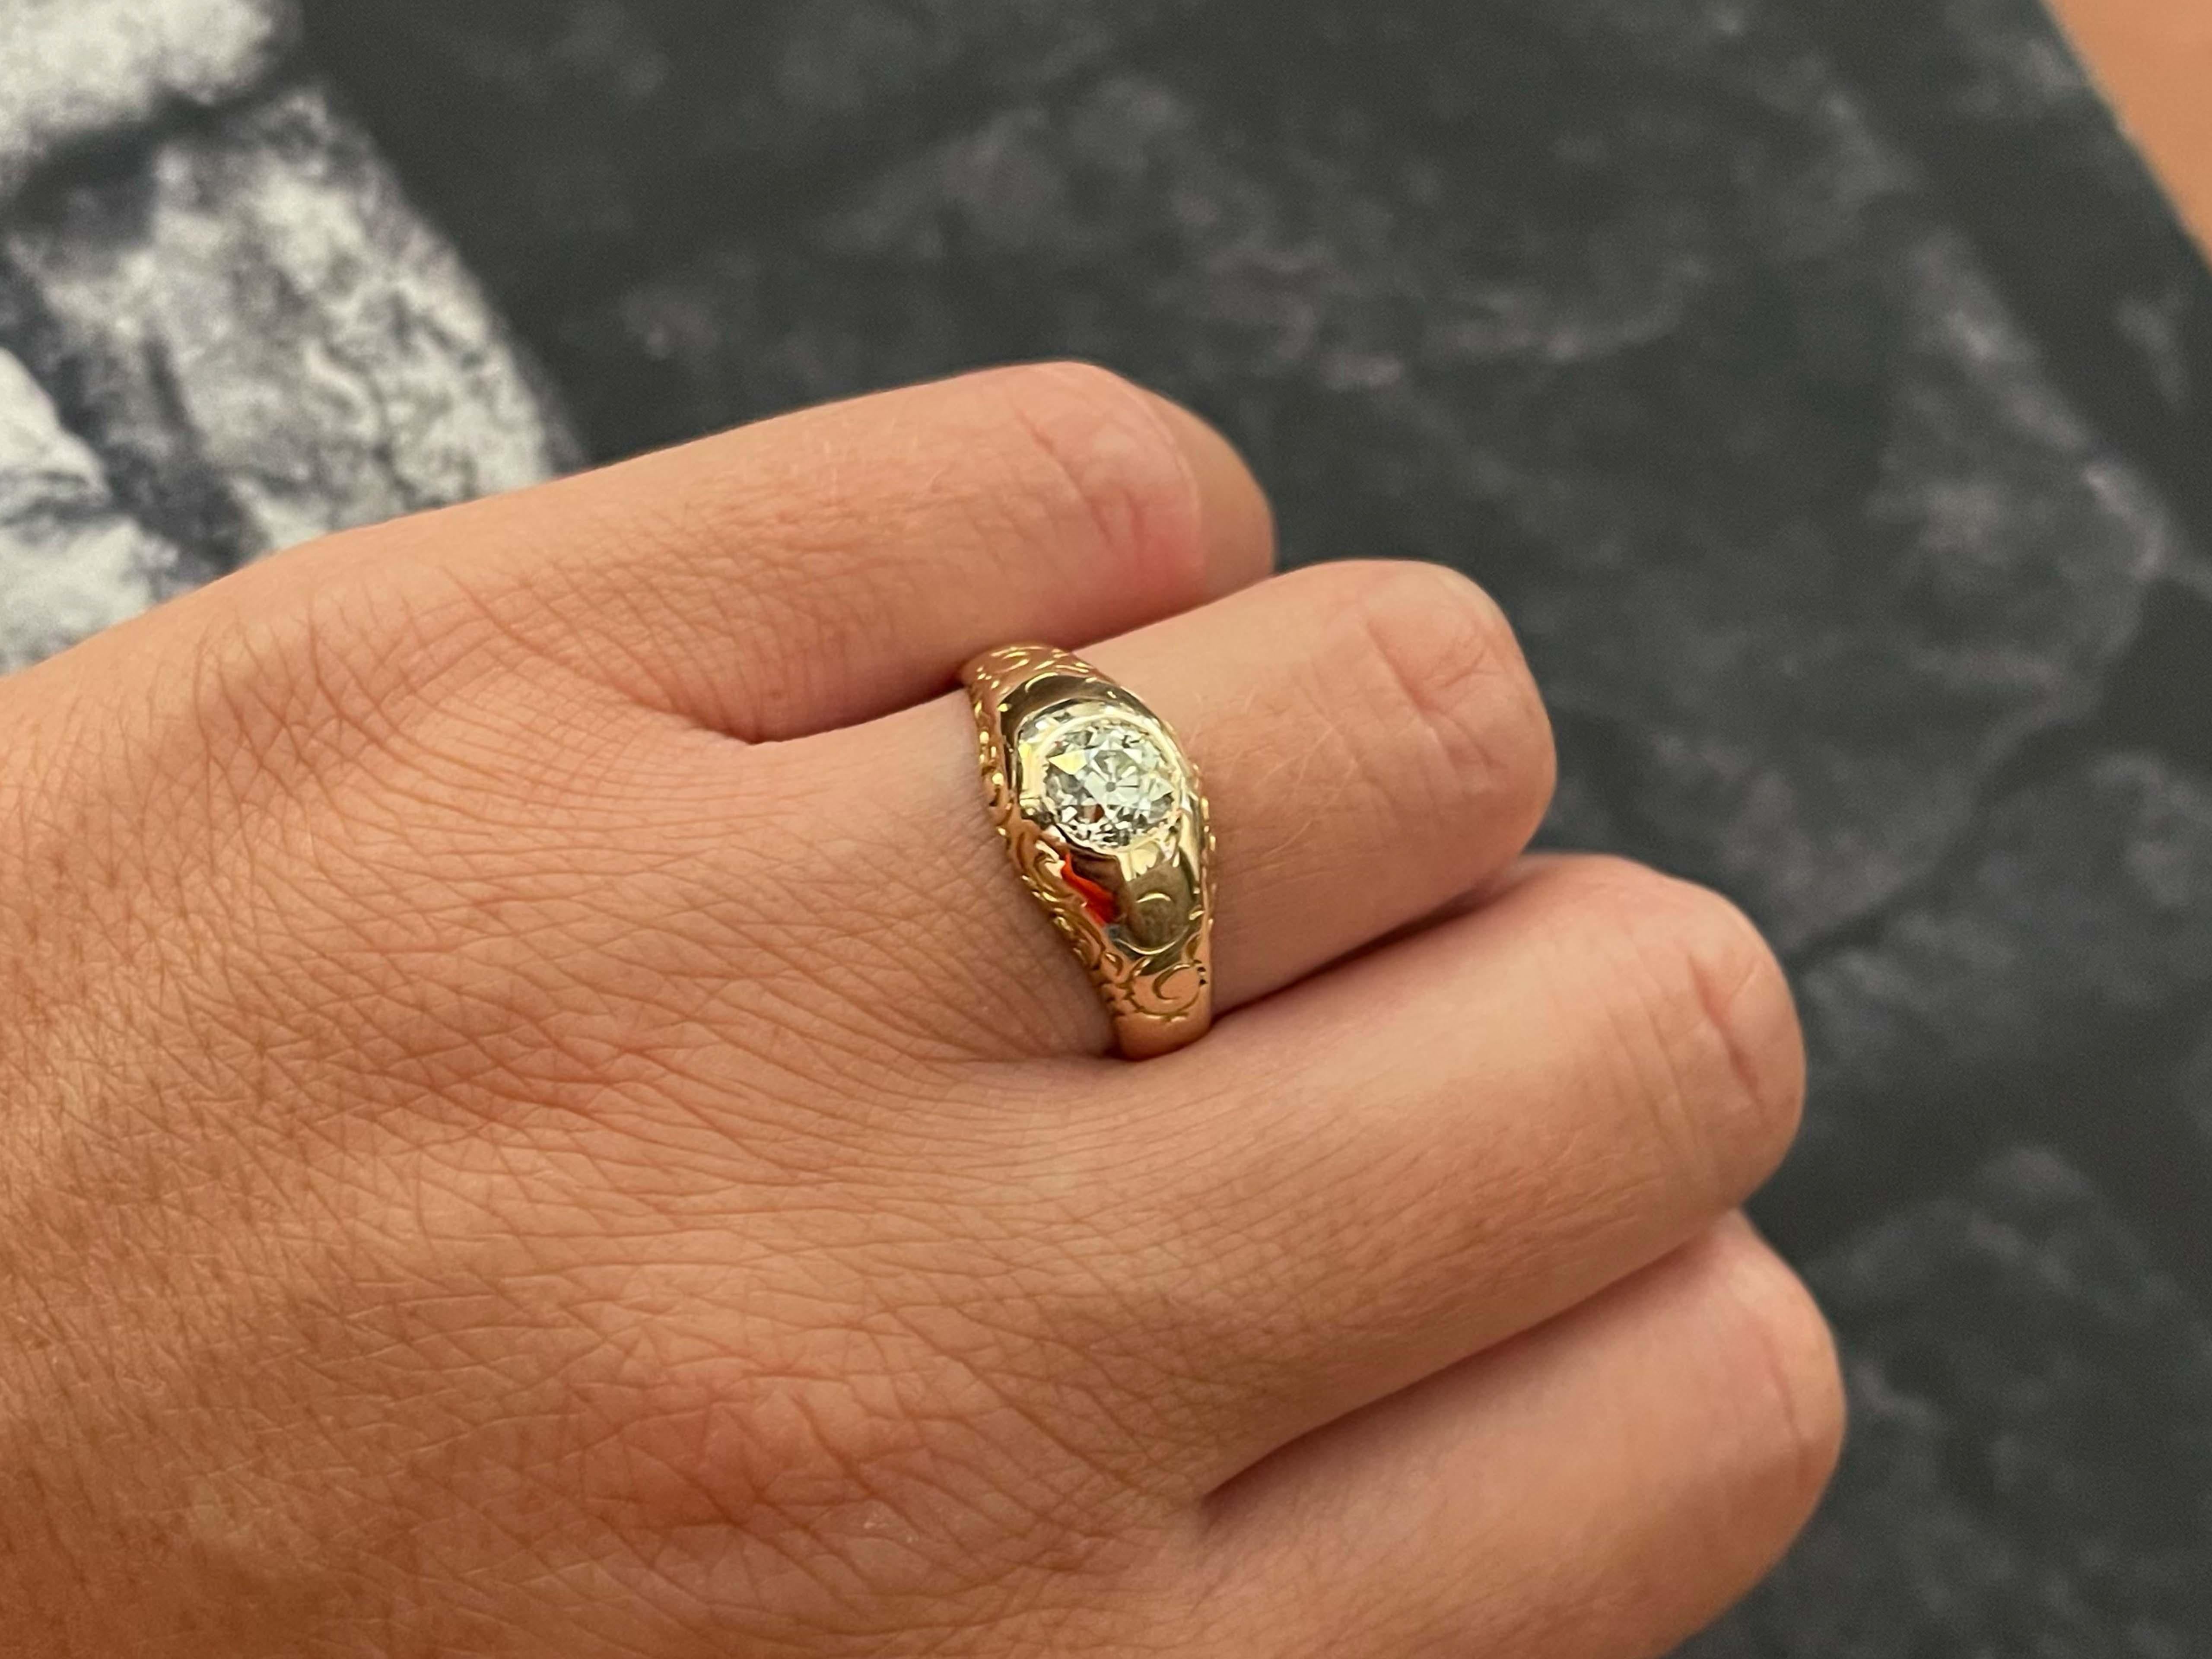 Item Specifications:

Metal: 14k Pink Gold

Style: Statement Ring

Ring Size: 8.75 (resizing available for a fee)

Total Weight: 5.2 Grams

Diamond Count: 1 old European cut 

Diamond Carat Weight: 0.82


Diamond Clarity: SI2


Diamond Color: